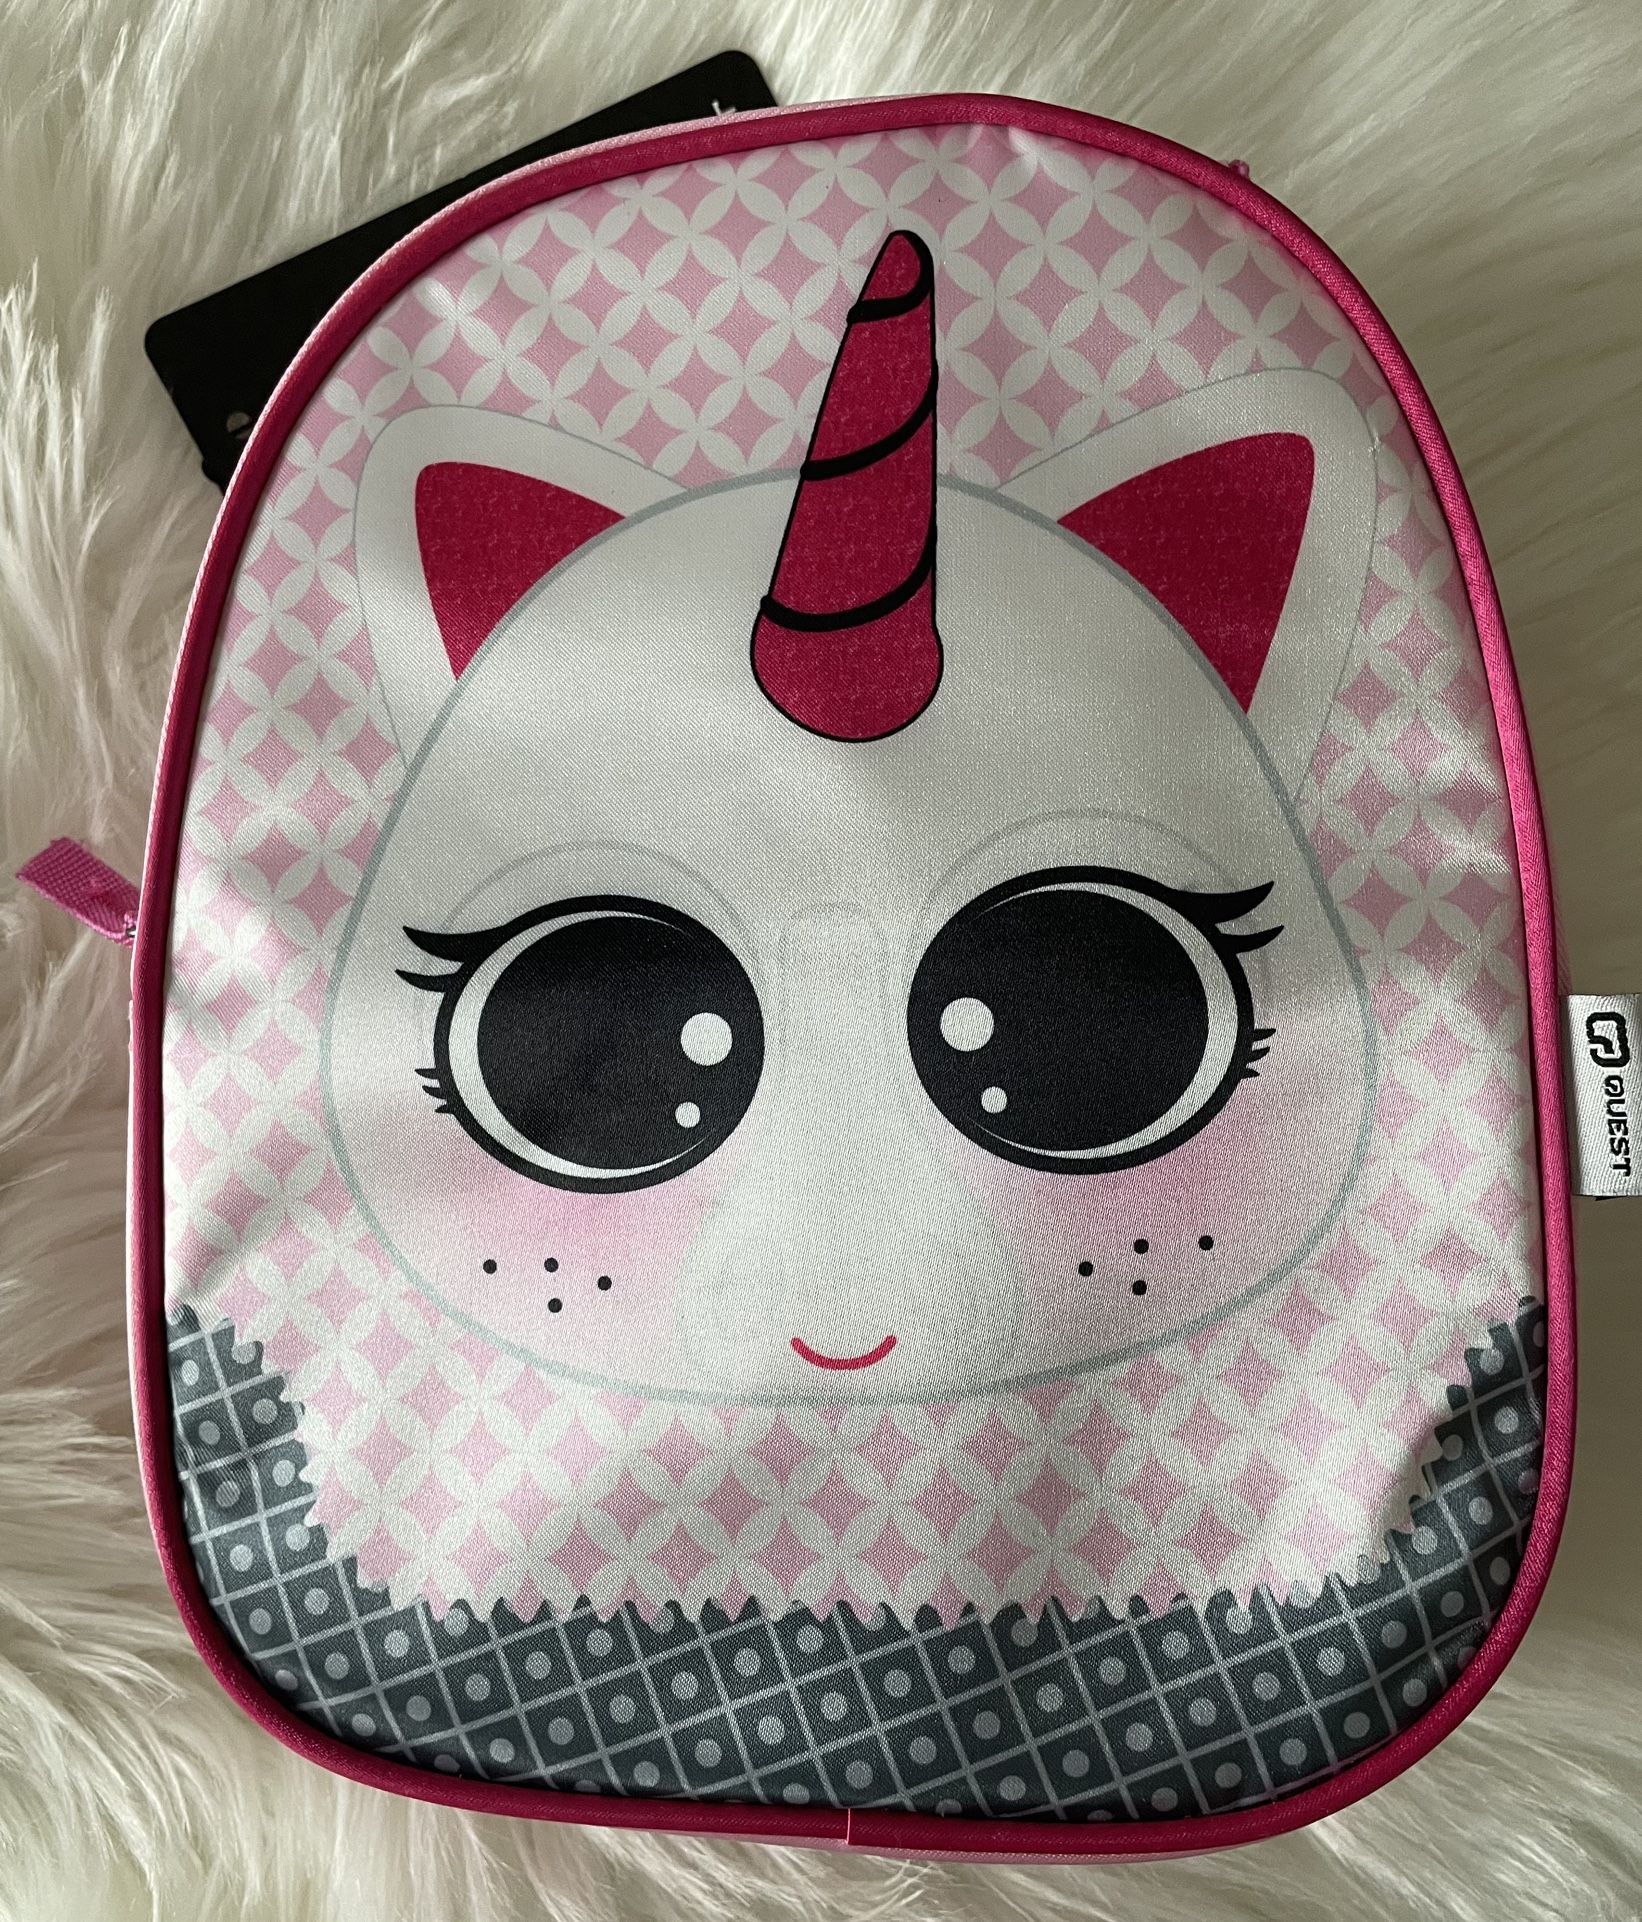 Brand New Quest Kids Insulated Lunch Bag With Zipper Caticorn Design Pink Cooler Girl(cash & pick up only)